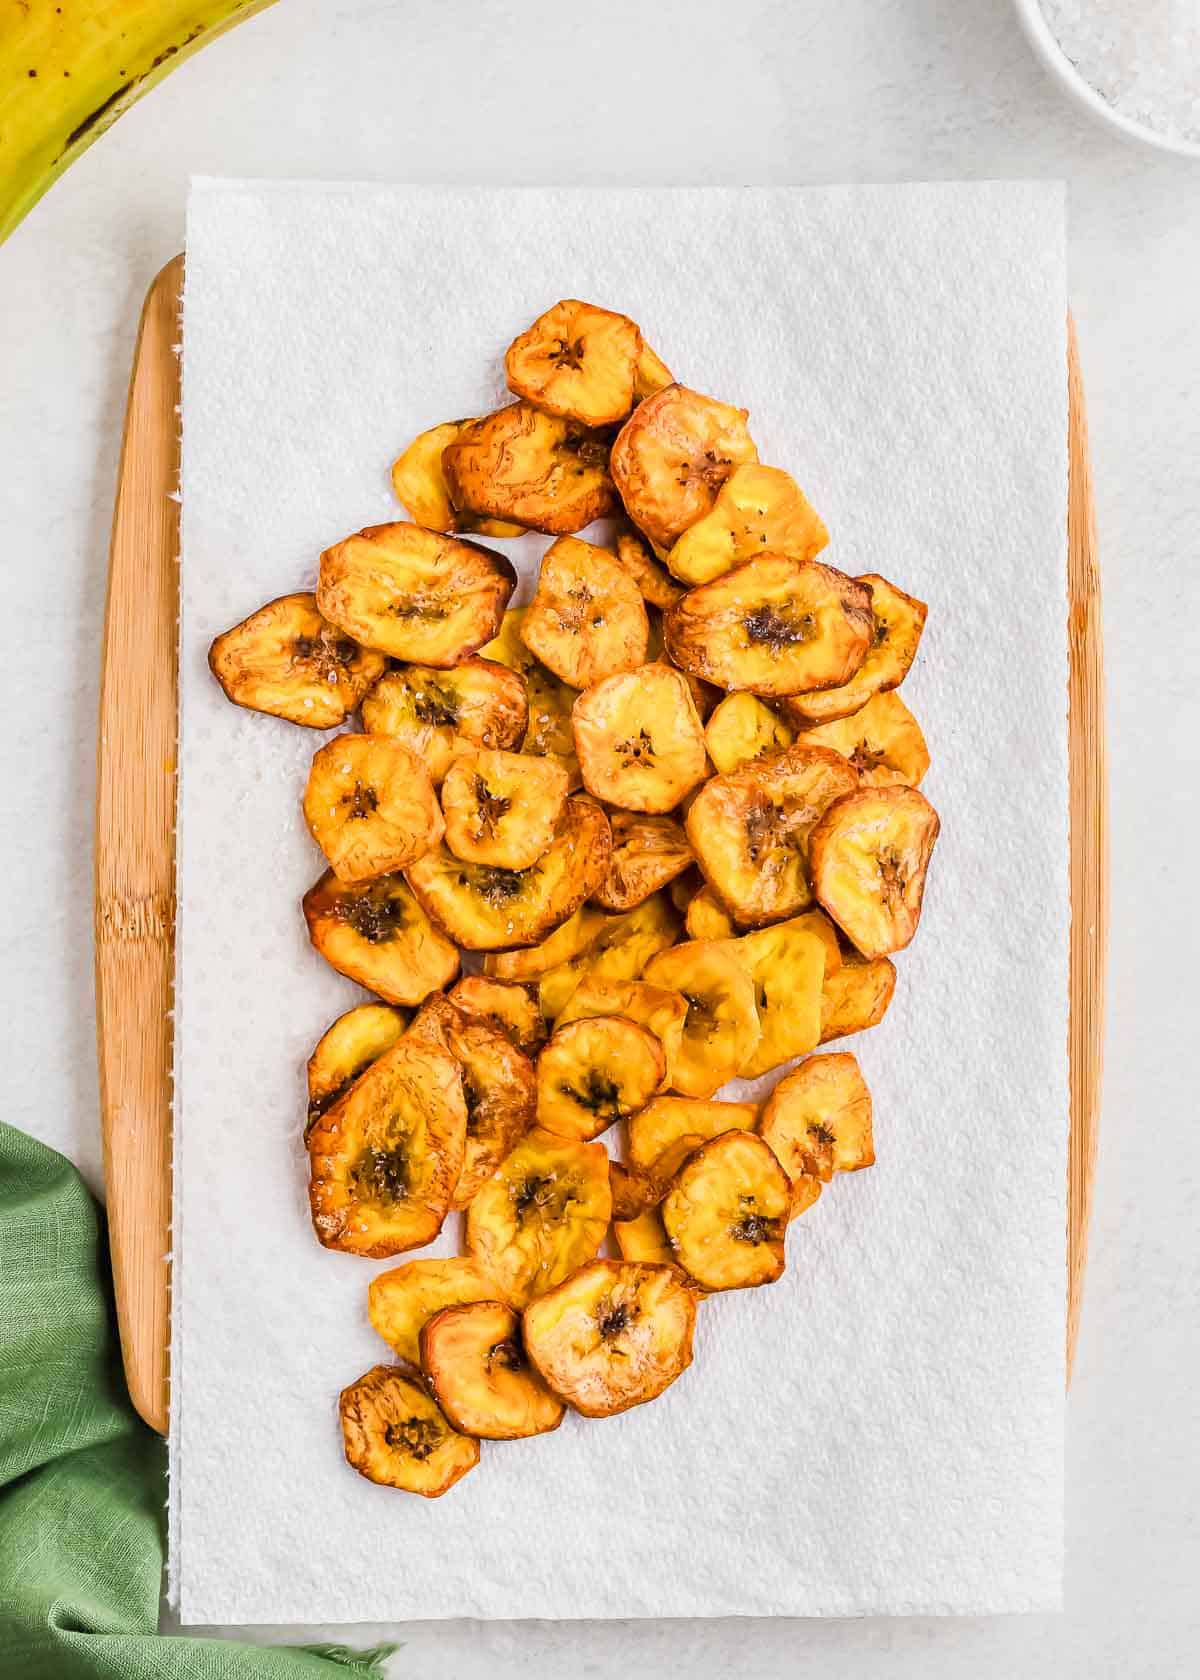 Fried plantains arranged on a paper towel beside a green towel and a wooden spatula.